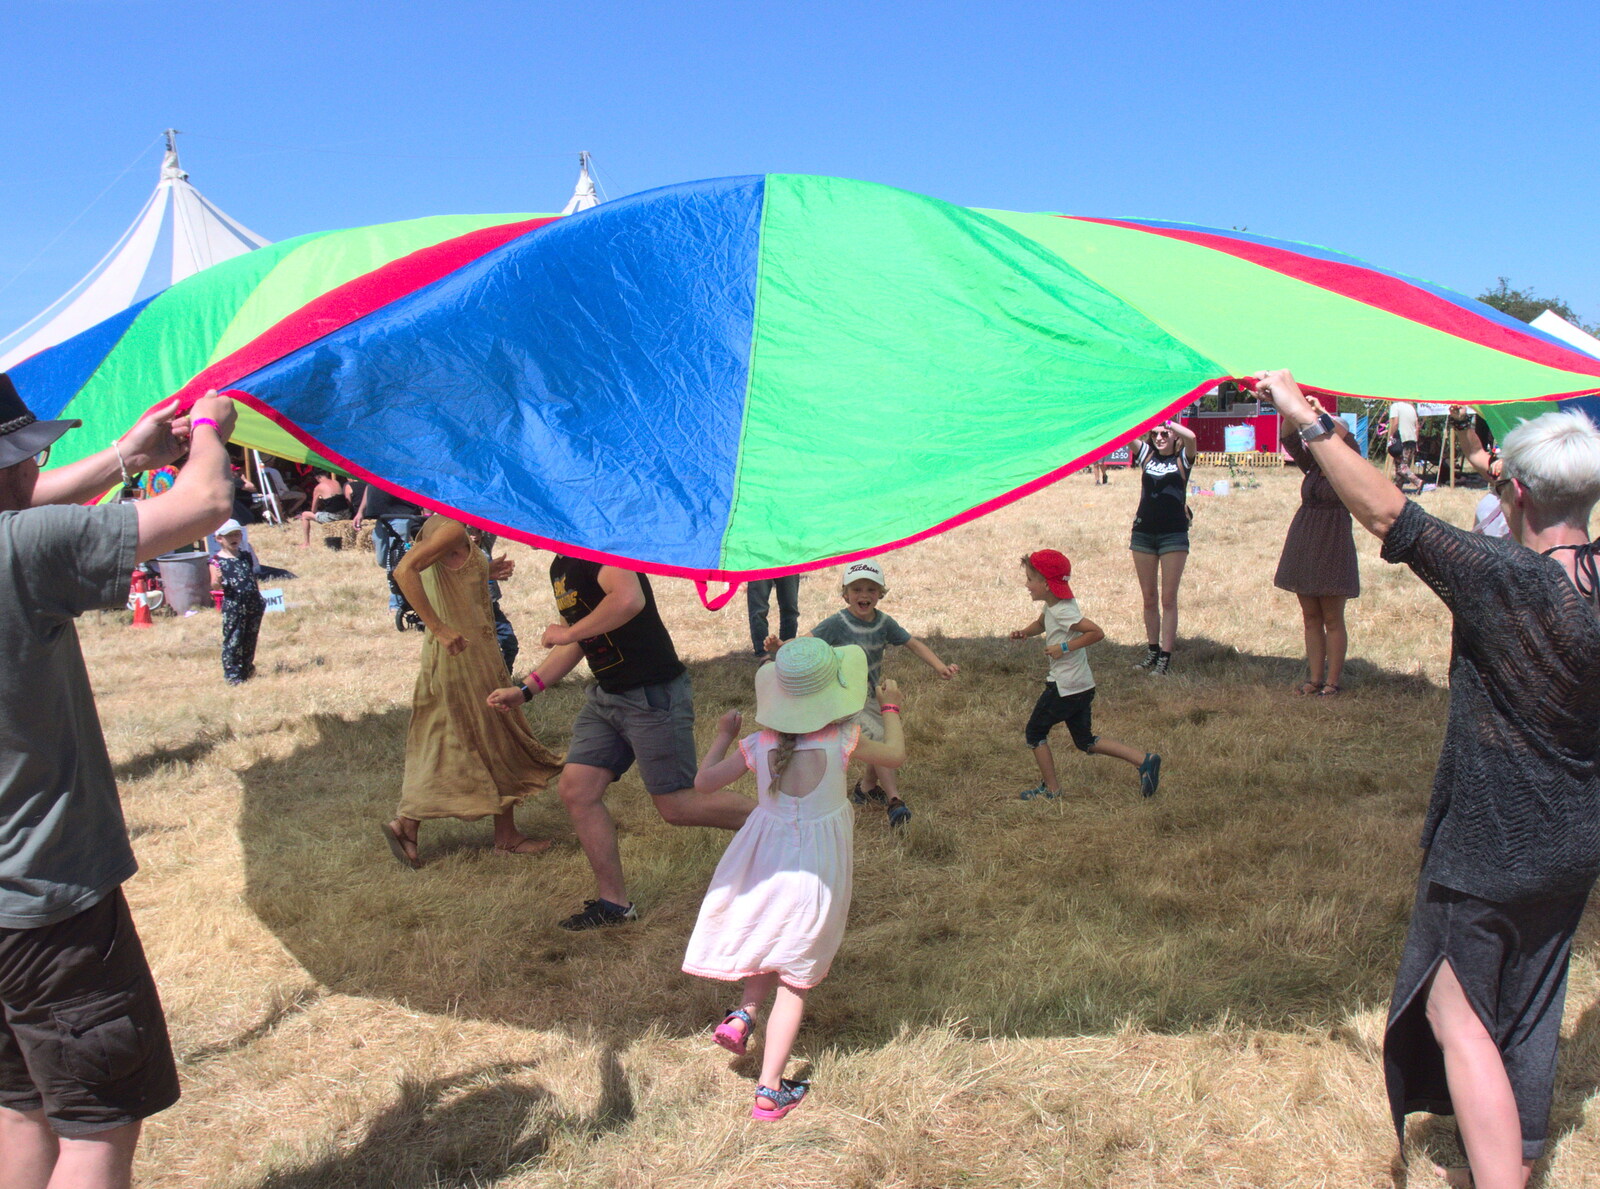 Outside, there's fun with a parachute from WoW Festival, Burston, Norfolk - 29th June - 1st July 2018